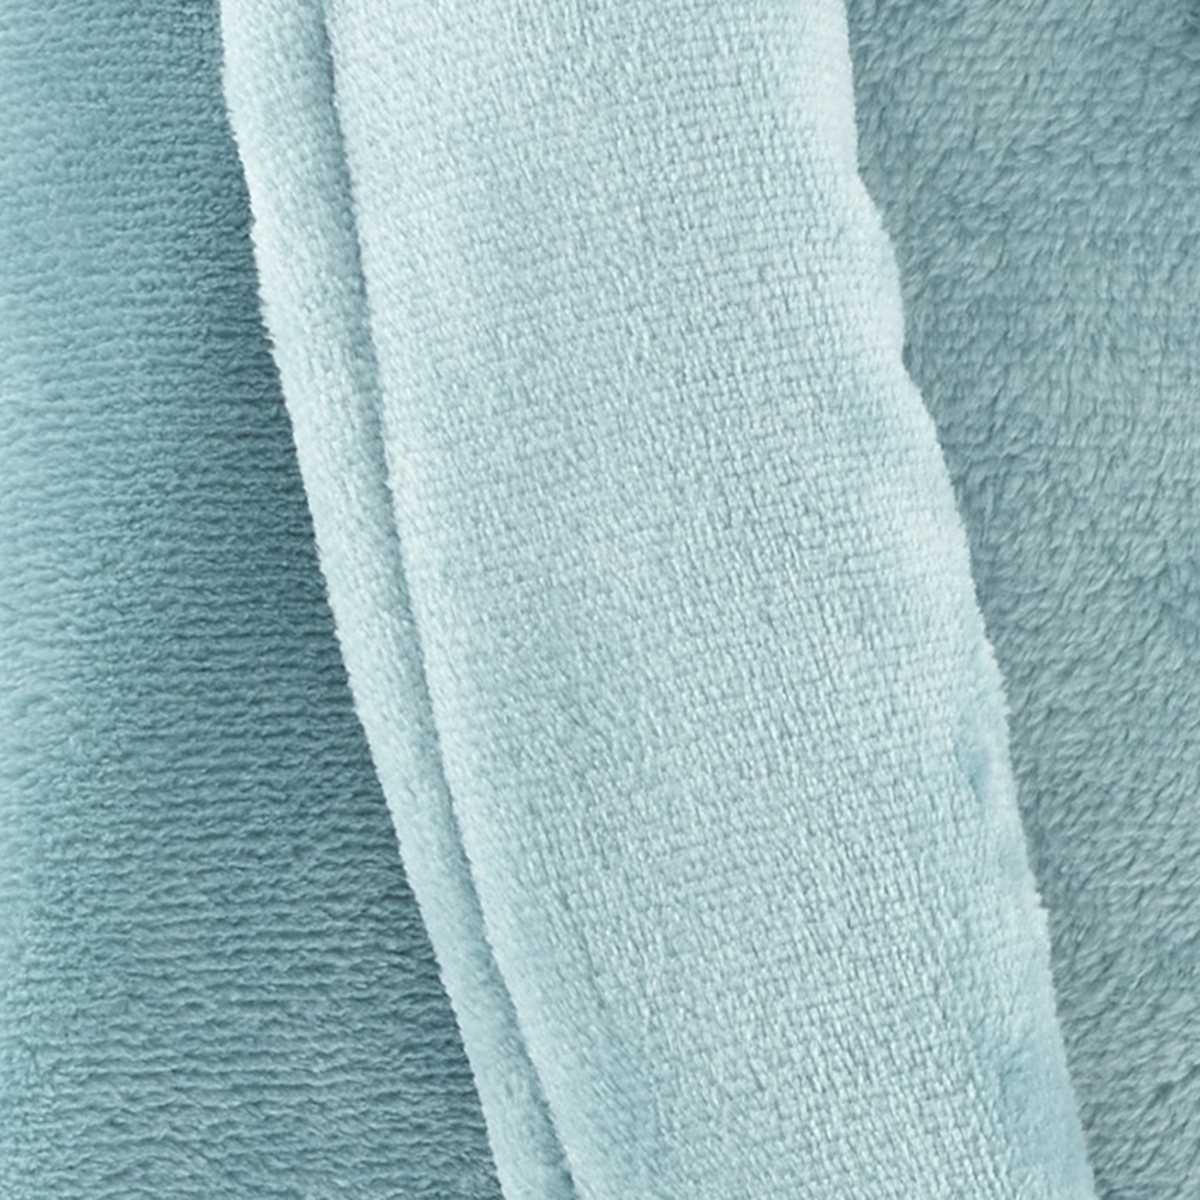 Swatch Sample of Pine Cone Hill Sheepy Fleece 2.0 Robe in Color Teal